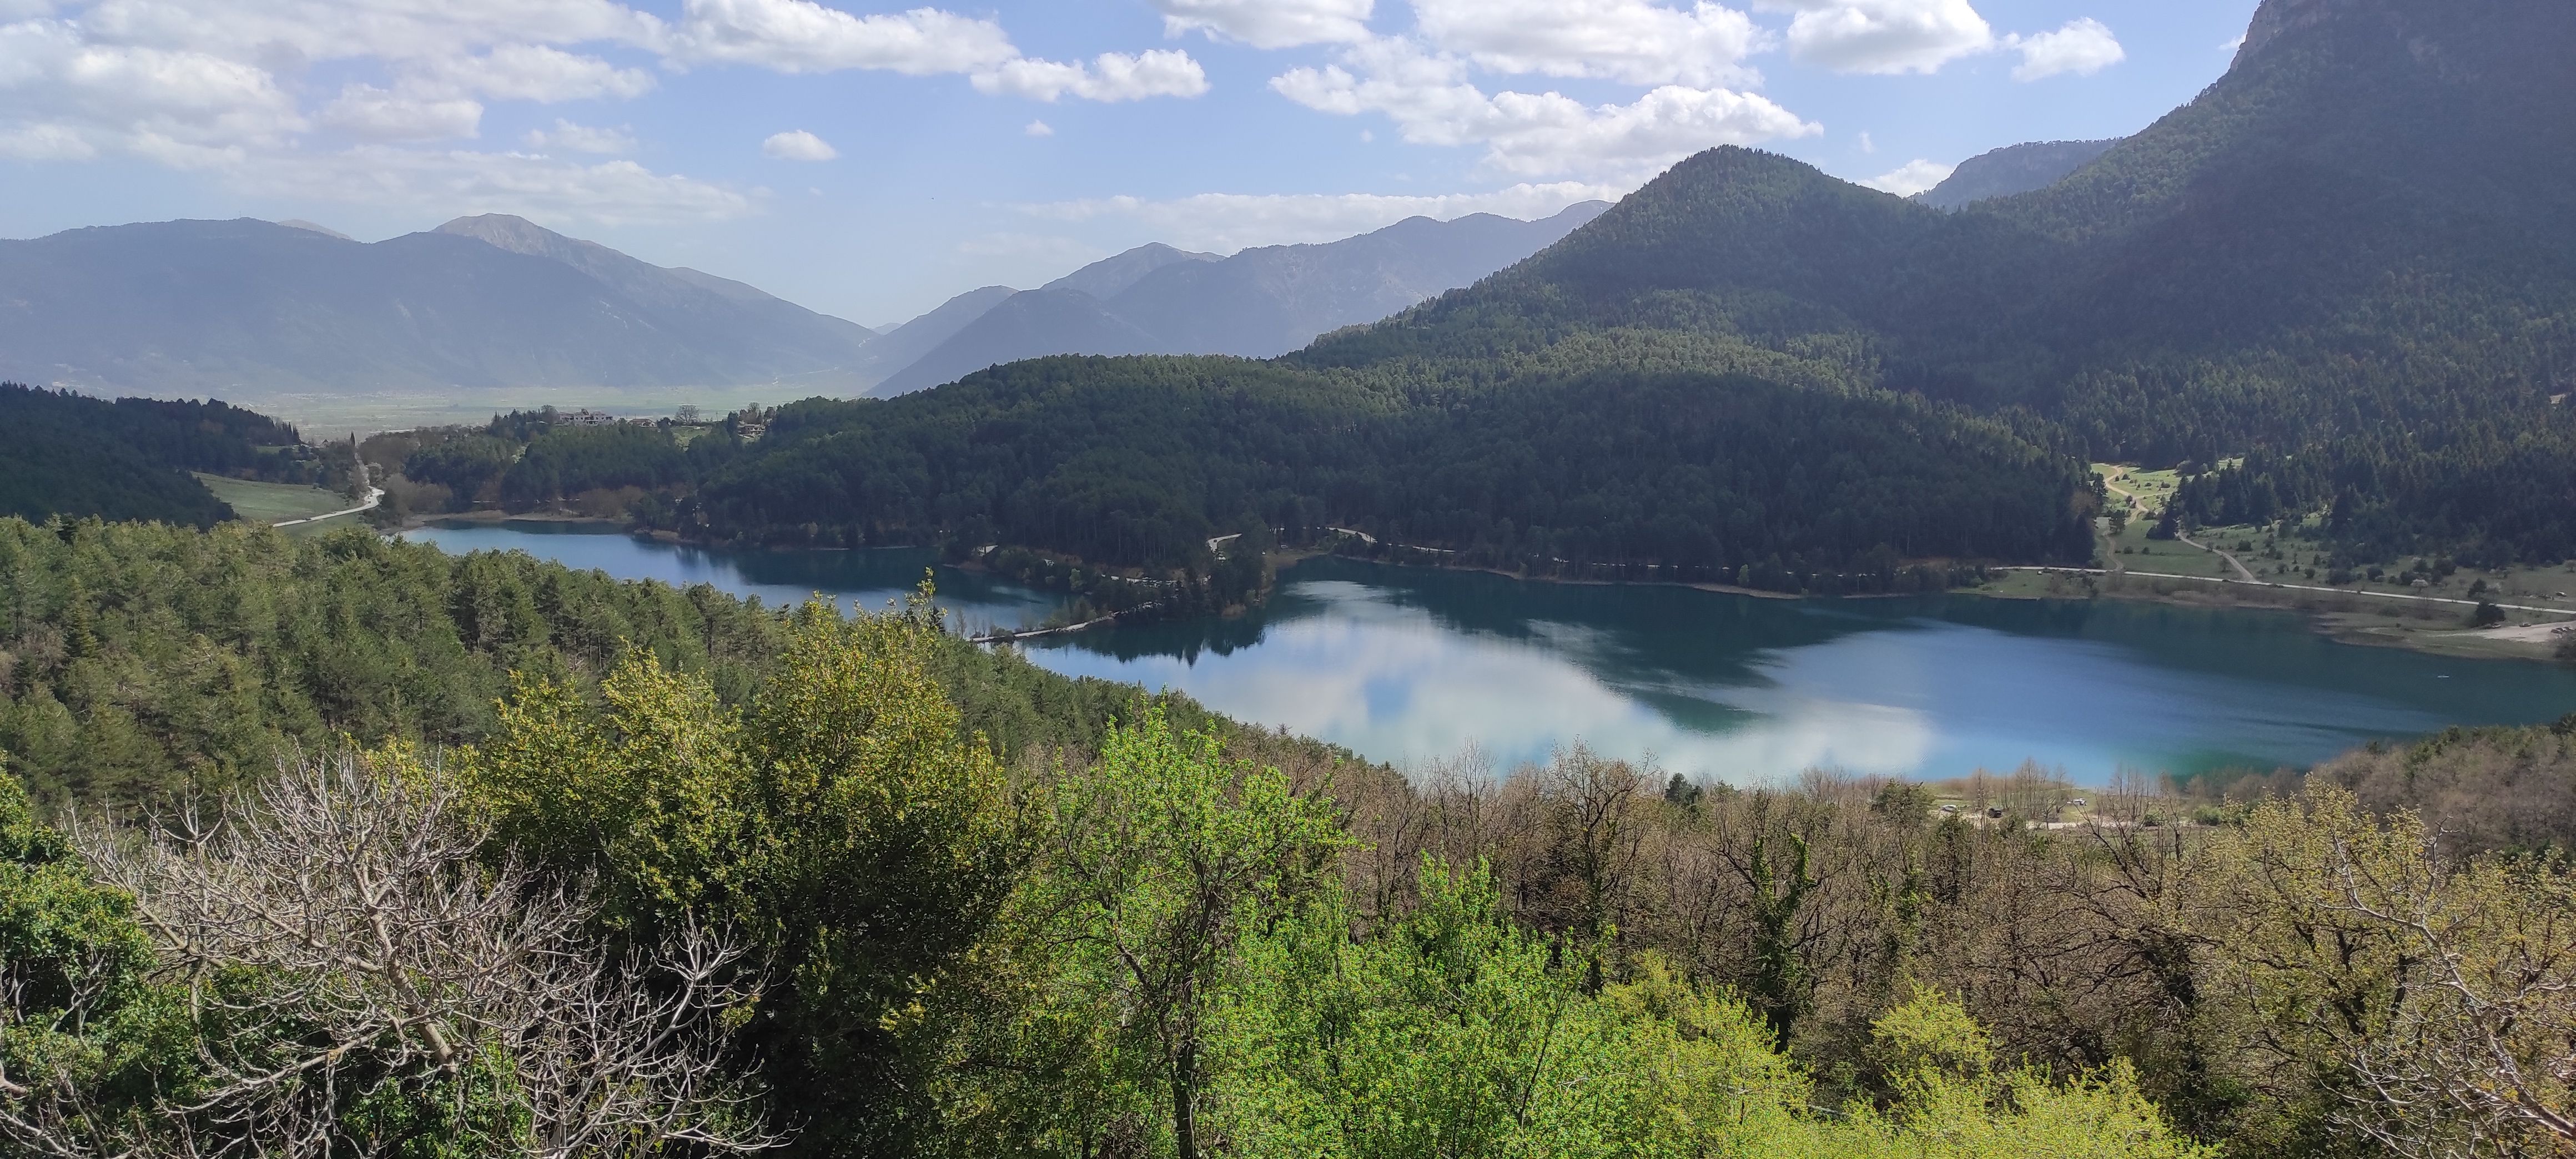 Meet Doxa Lake and a Monastery of great beauty – More history, more action!